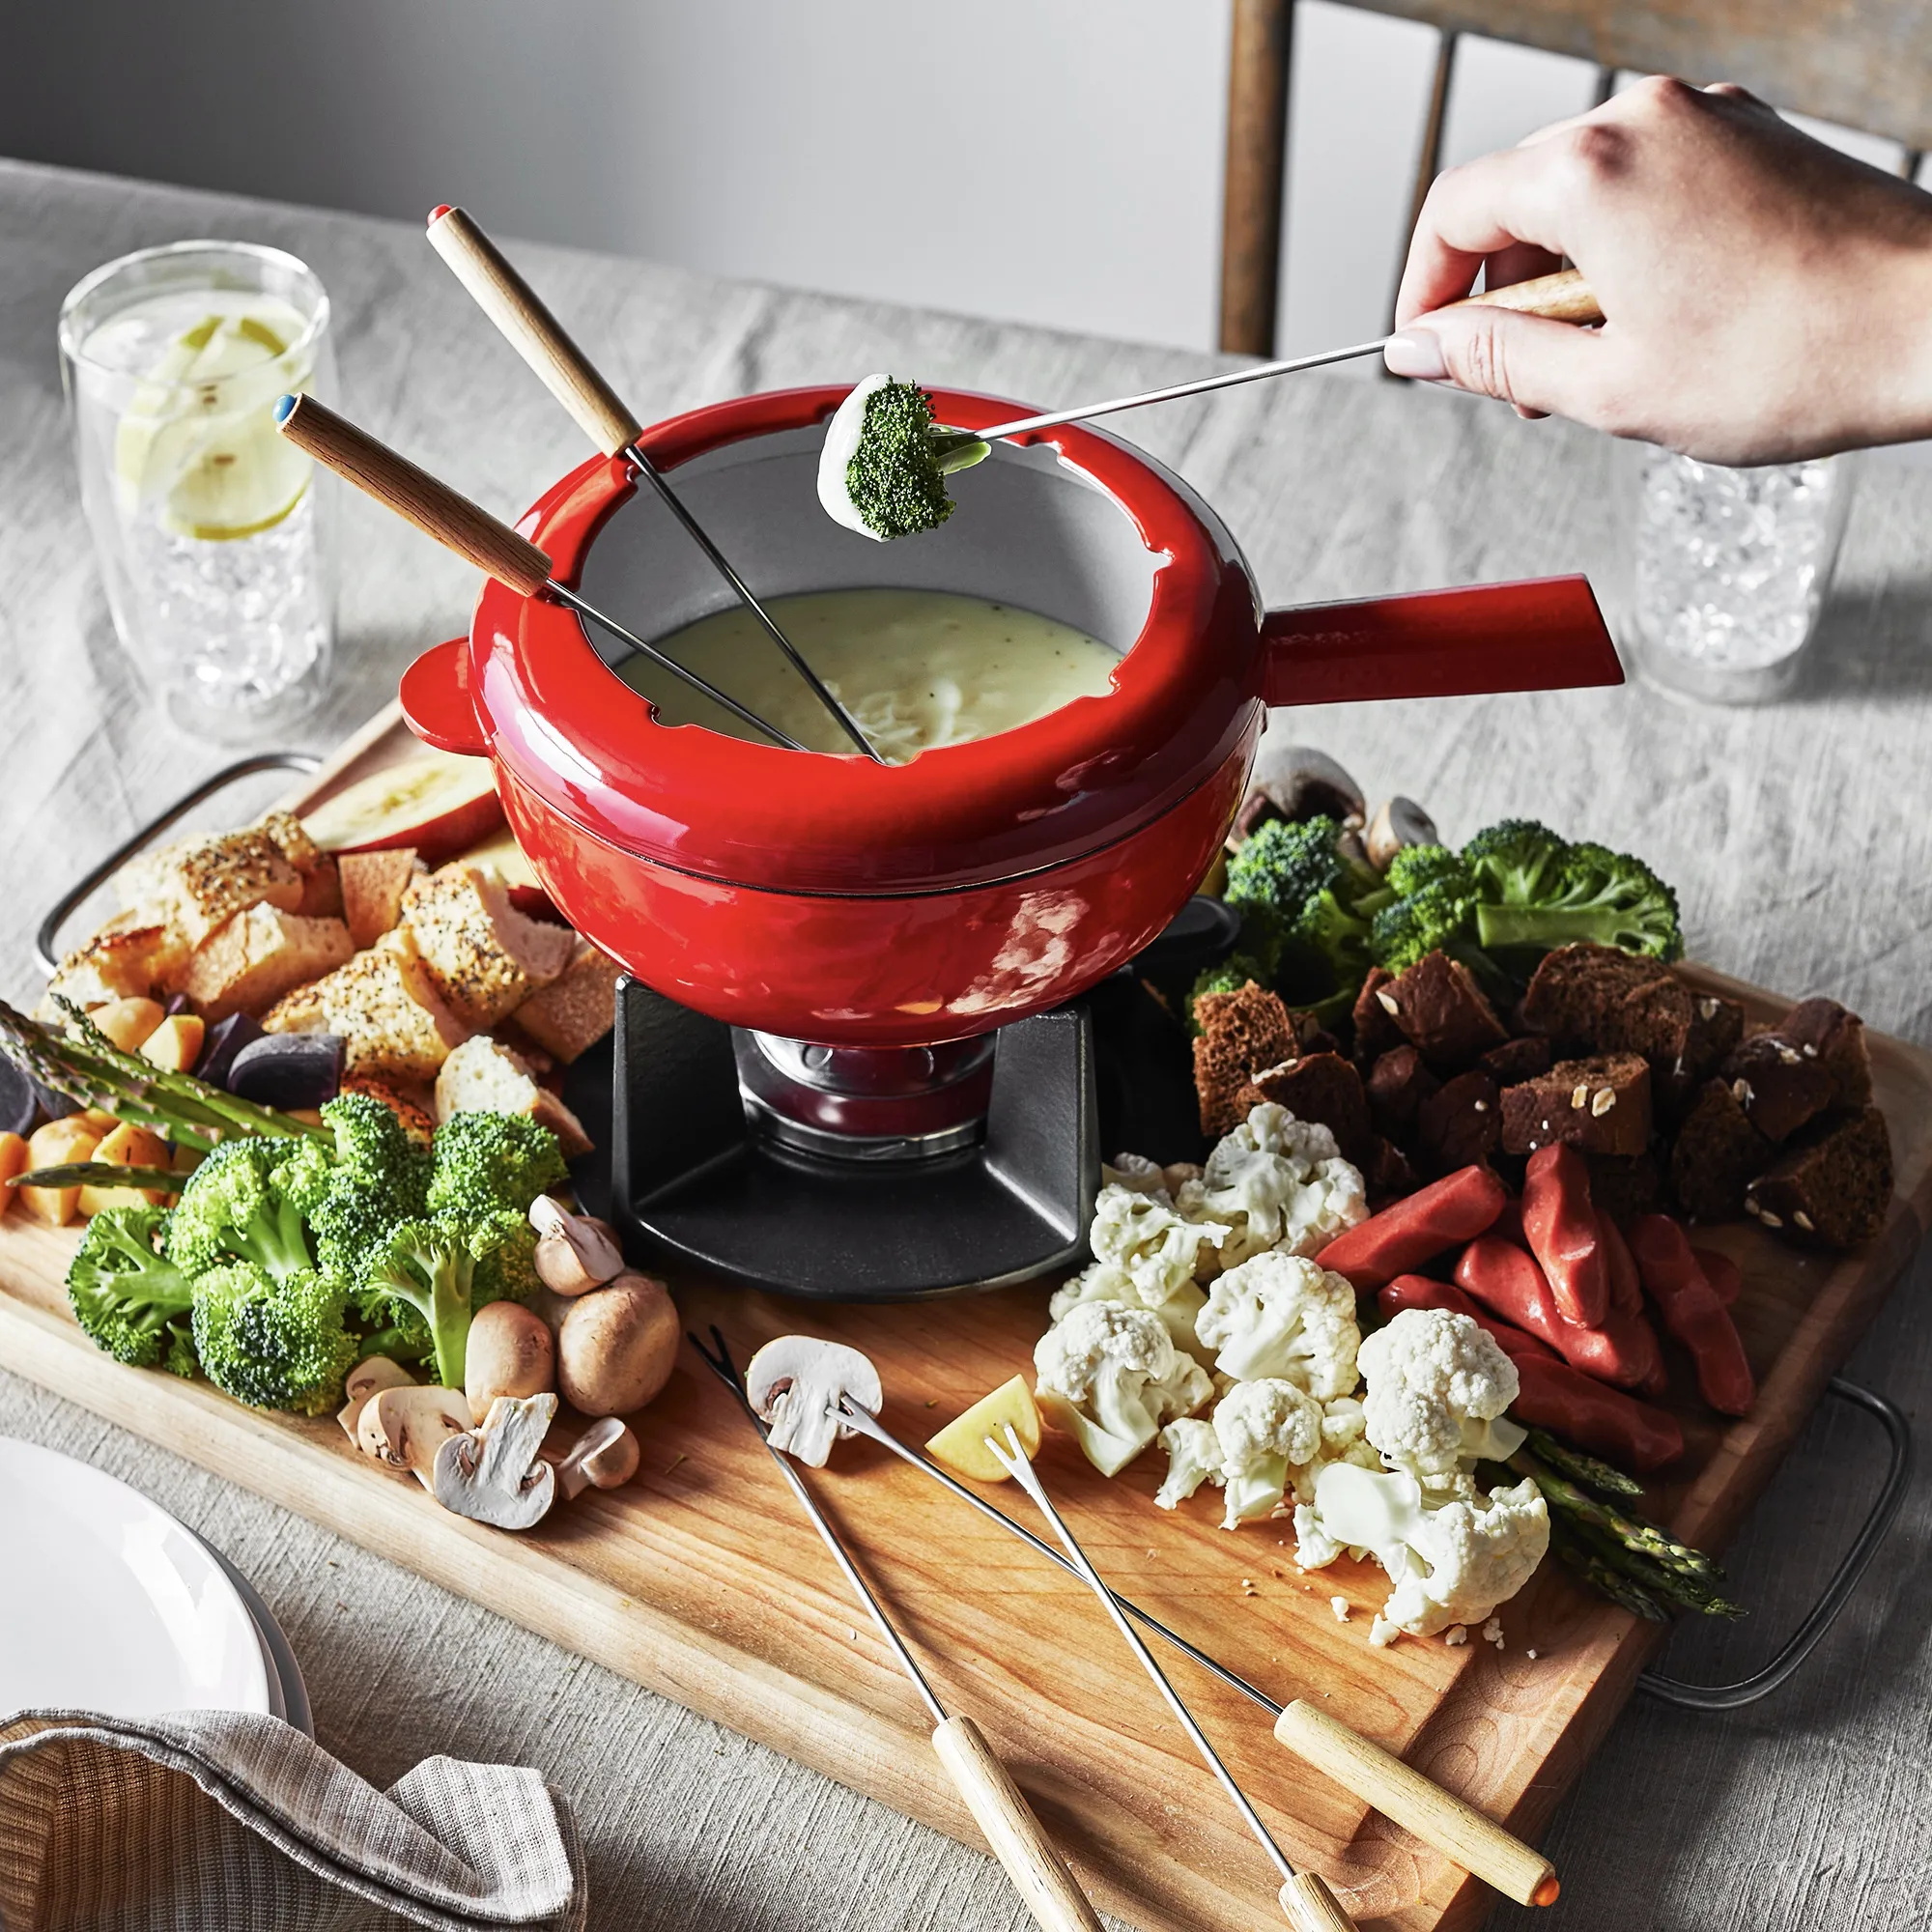 https://www.homethreads.com/files/zwilling/1003156-zwilling-8-in-fondue-pot-set-with-6-forks-for-chocolate-caramel-cheese-sauces-and-more-2.webp